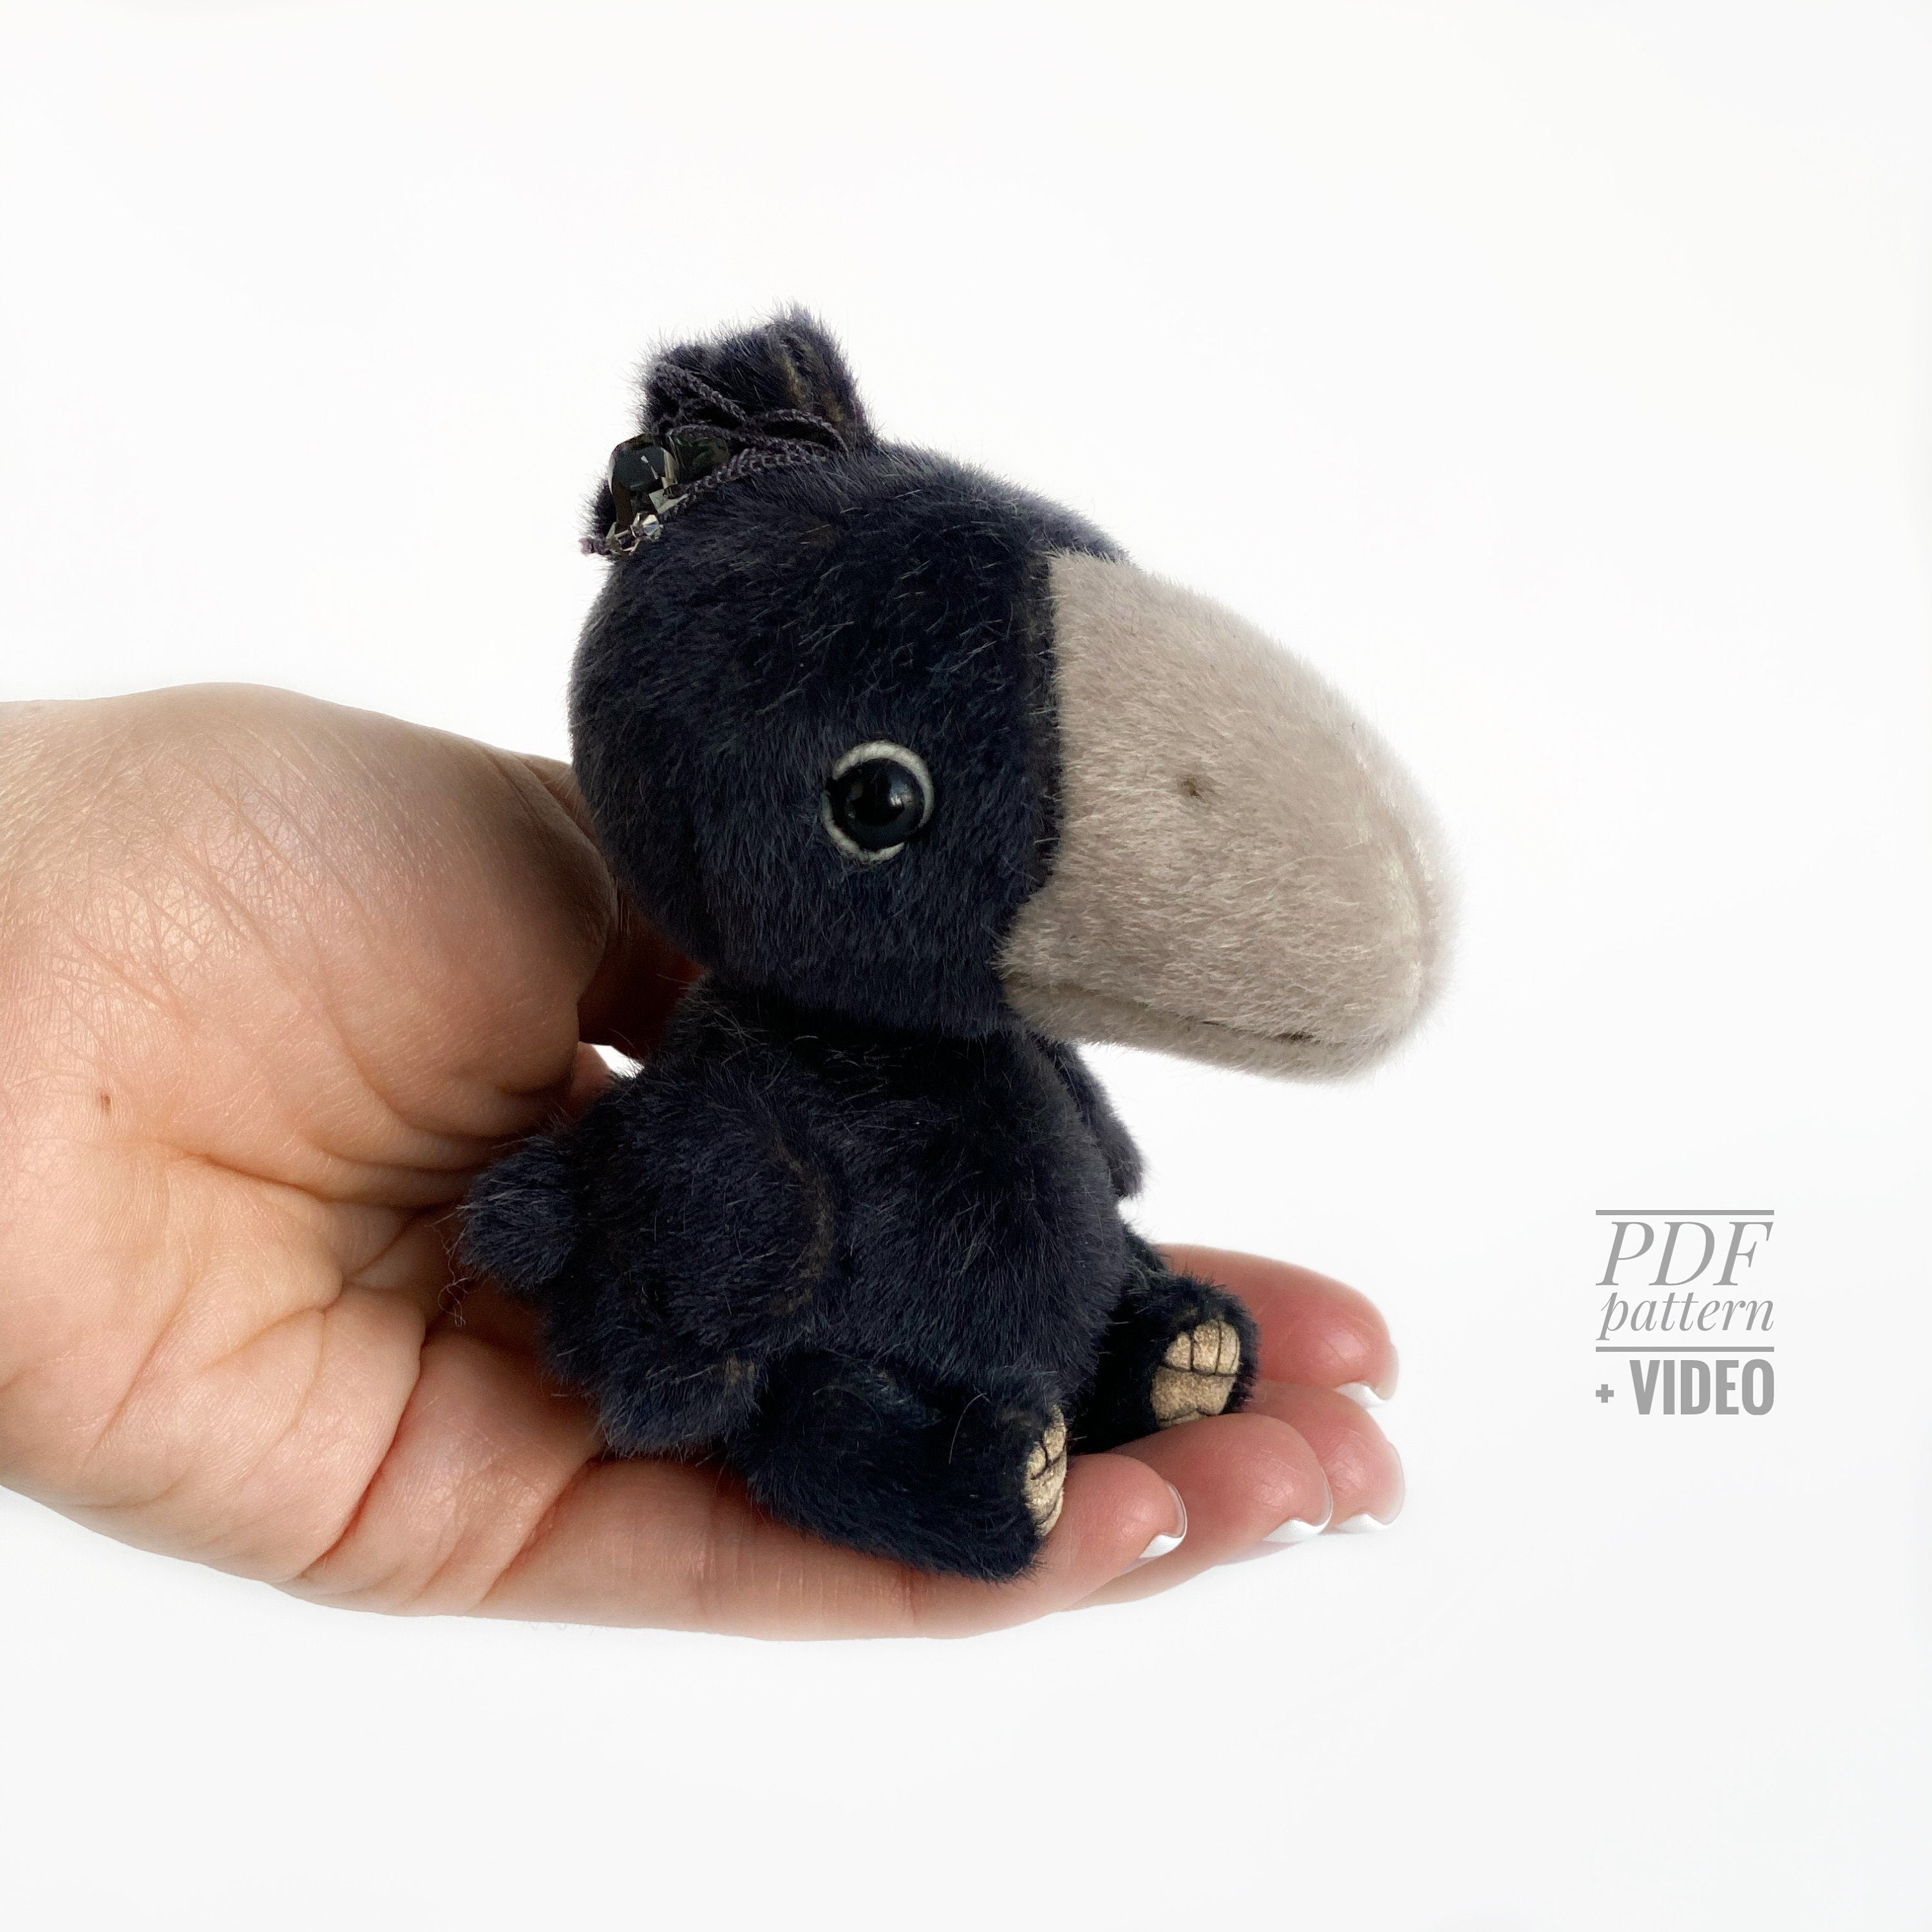 Crow bird PDF sewing pattern Video tutorial DIY stuffed toy pattern kids toy pattern easy to sew gift for creative friend